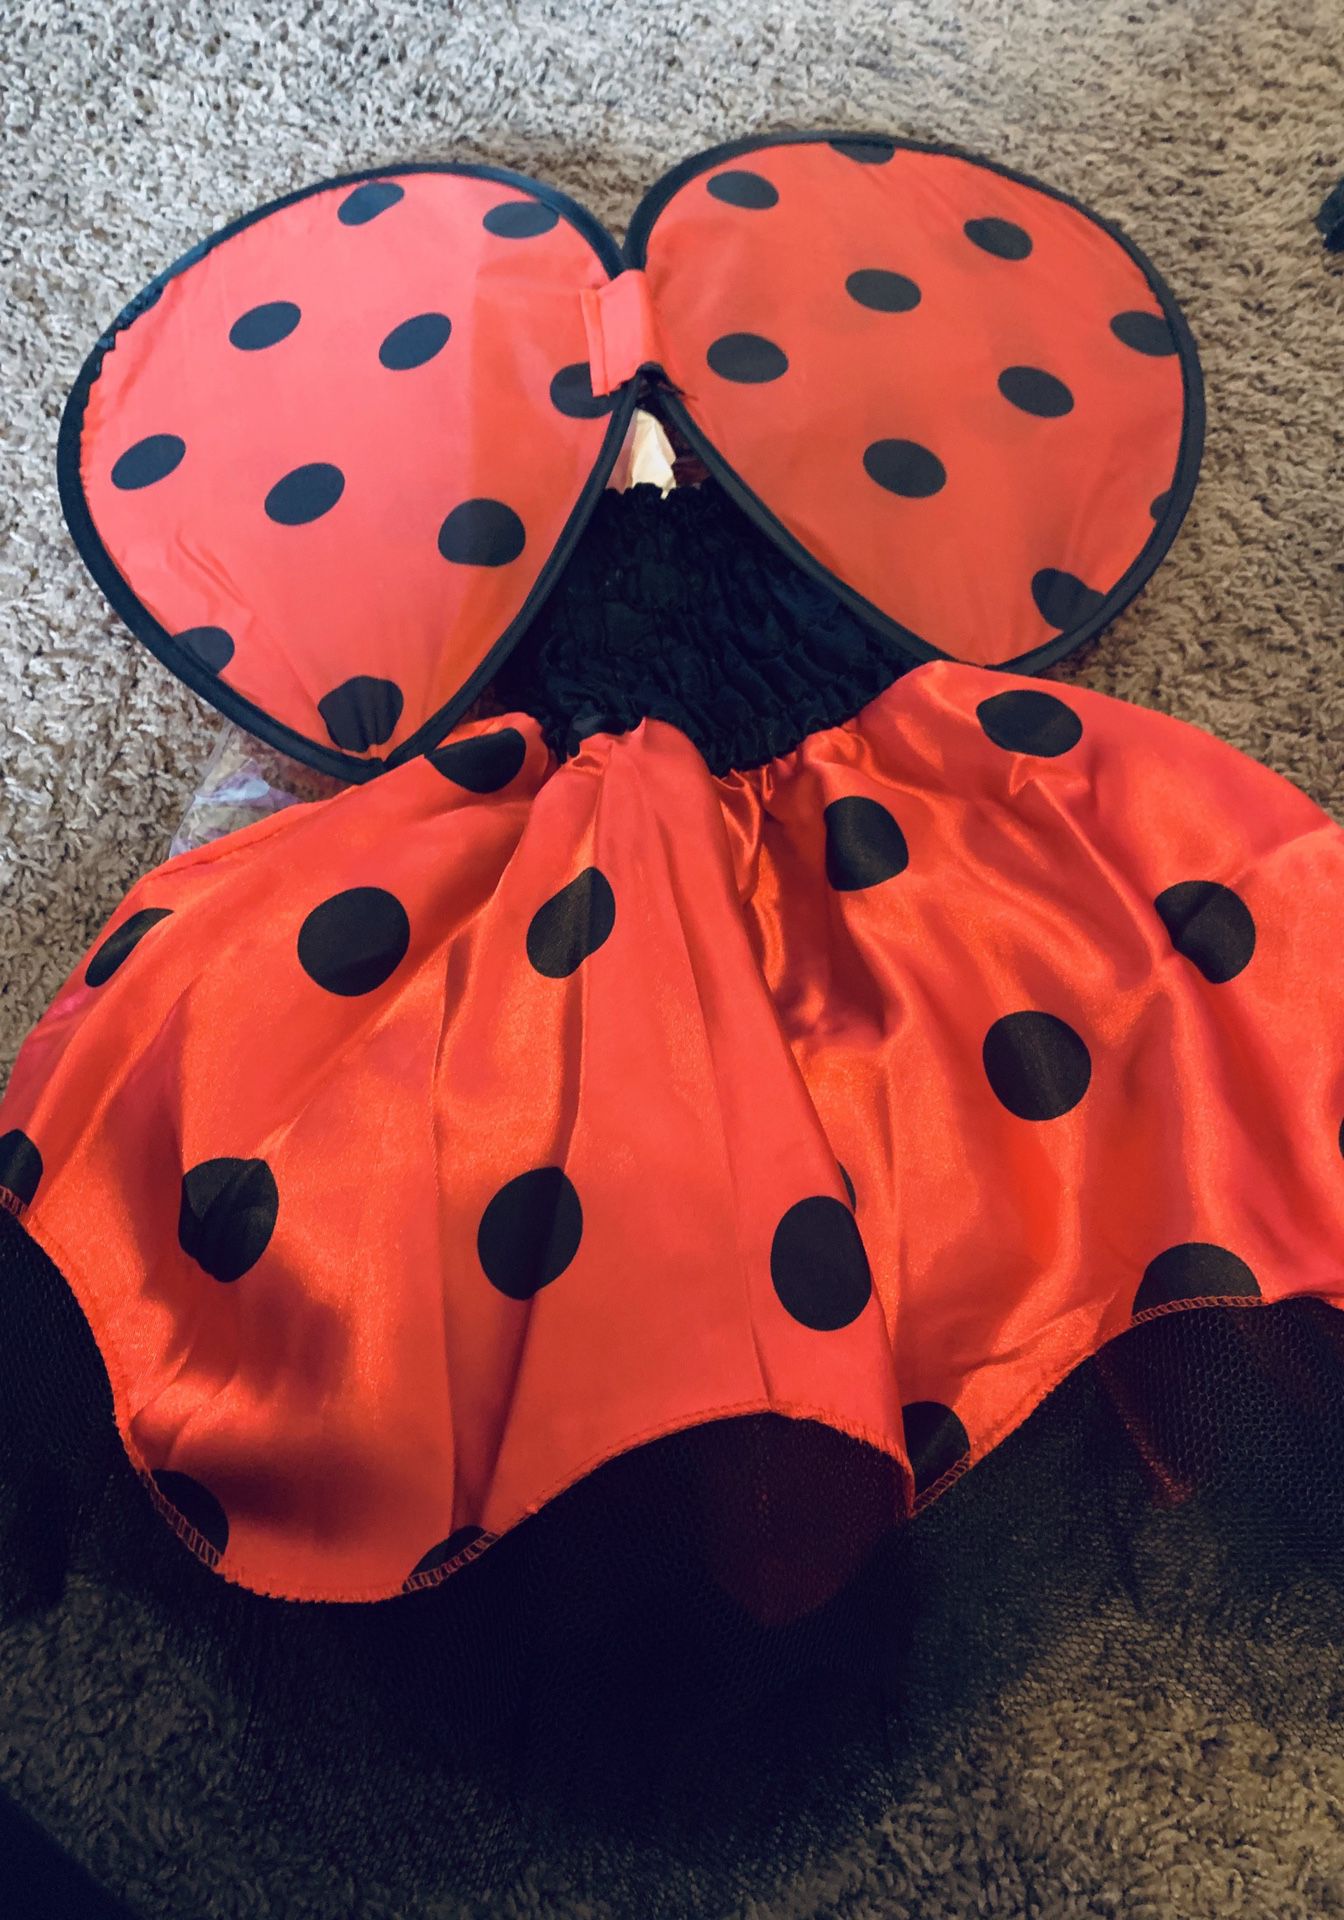 Halloween Costume - size up to 24 months - New